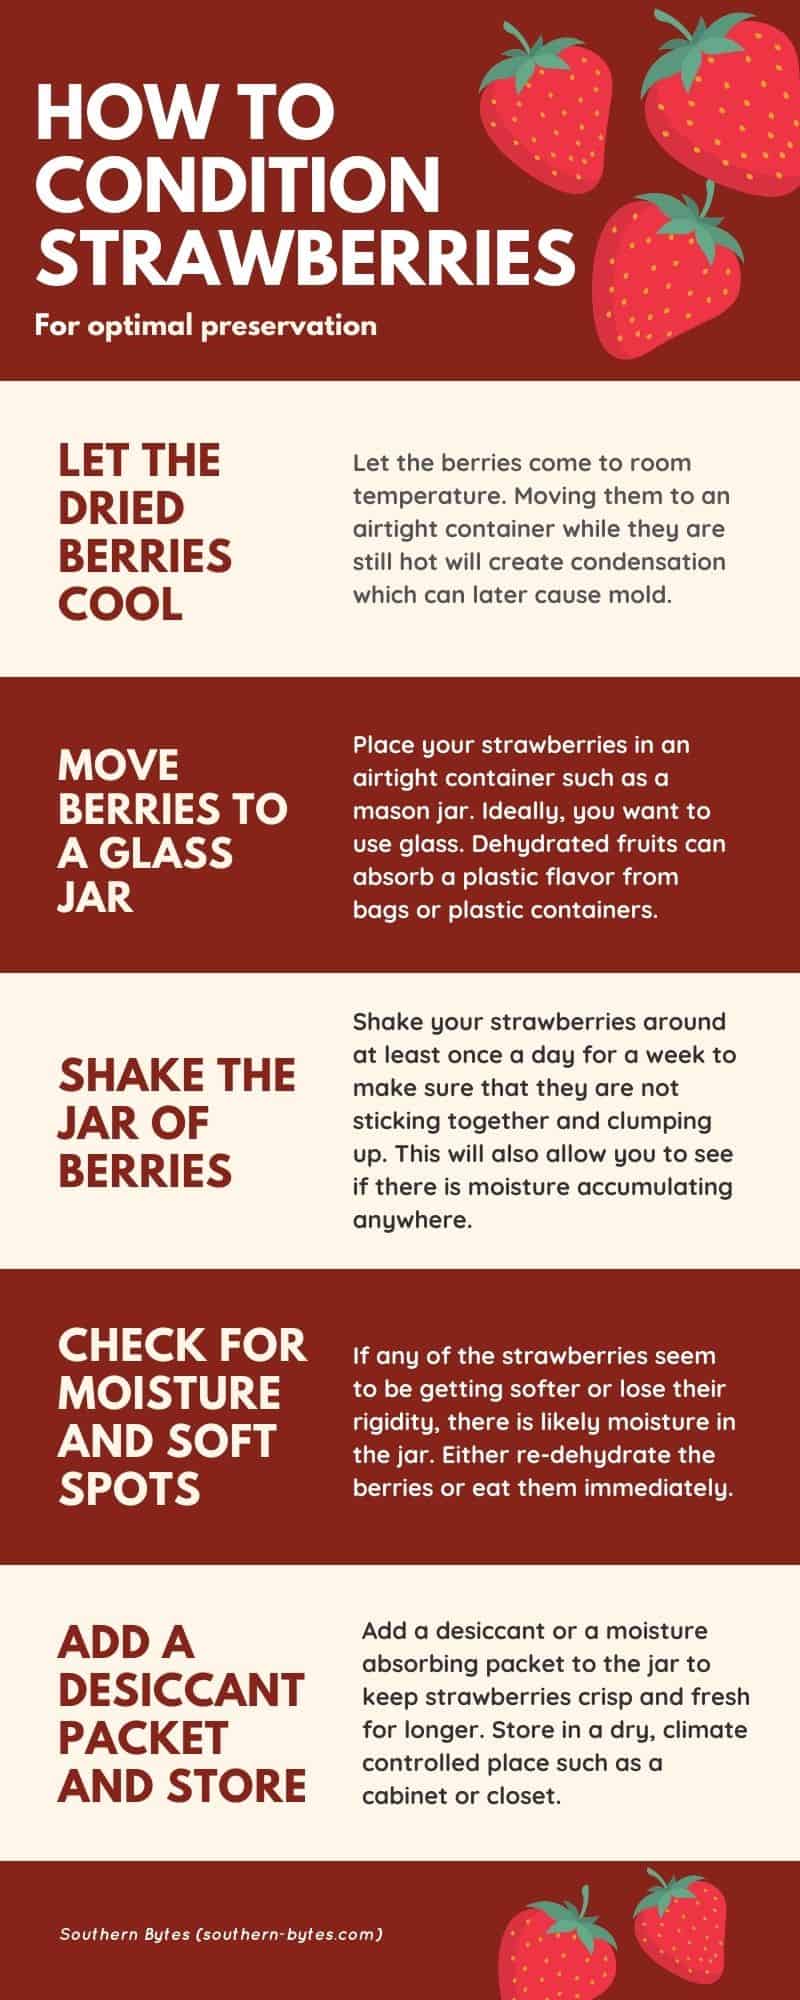 an infographic describing how to condition strawberries